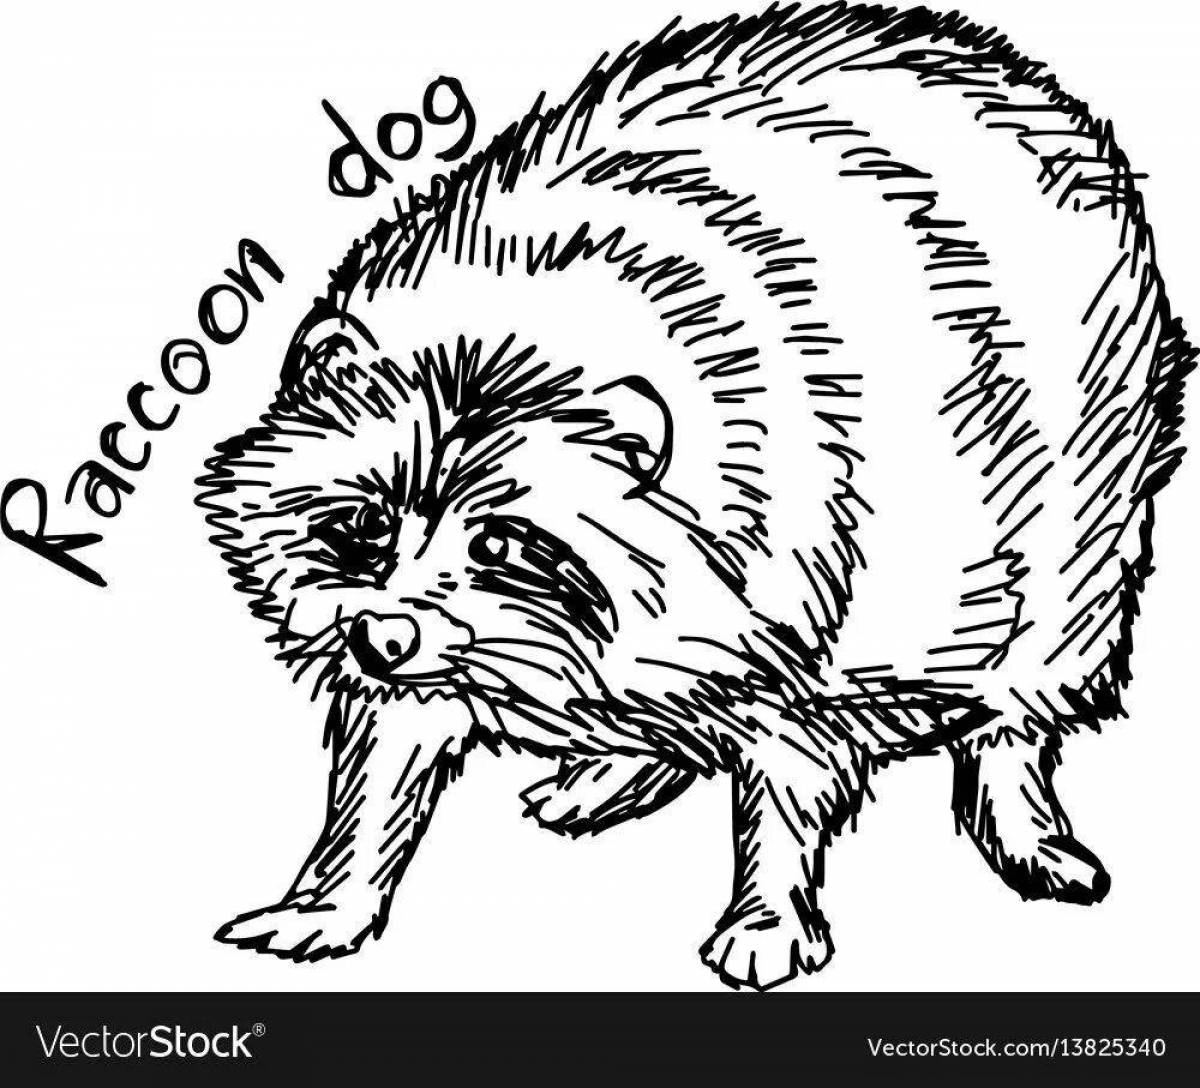 Coloring page witty raccoon dog